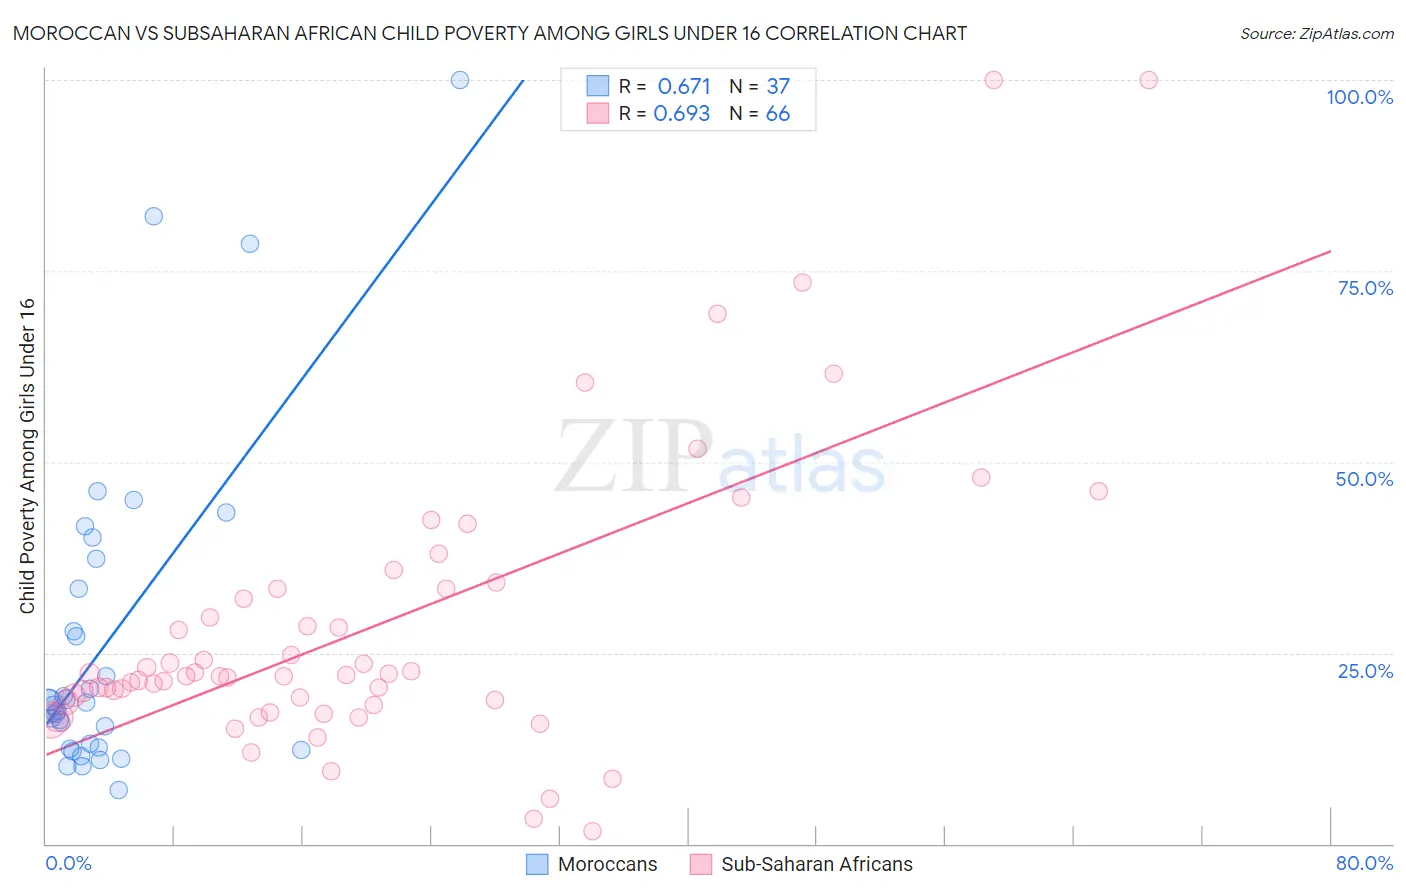 Moroccan vs Subsaharan African Child Poverty Among Girls Under 16